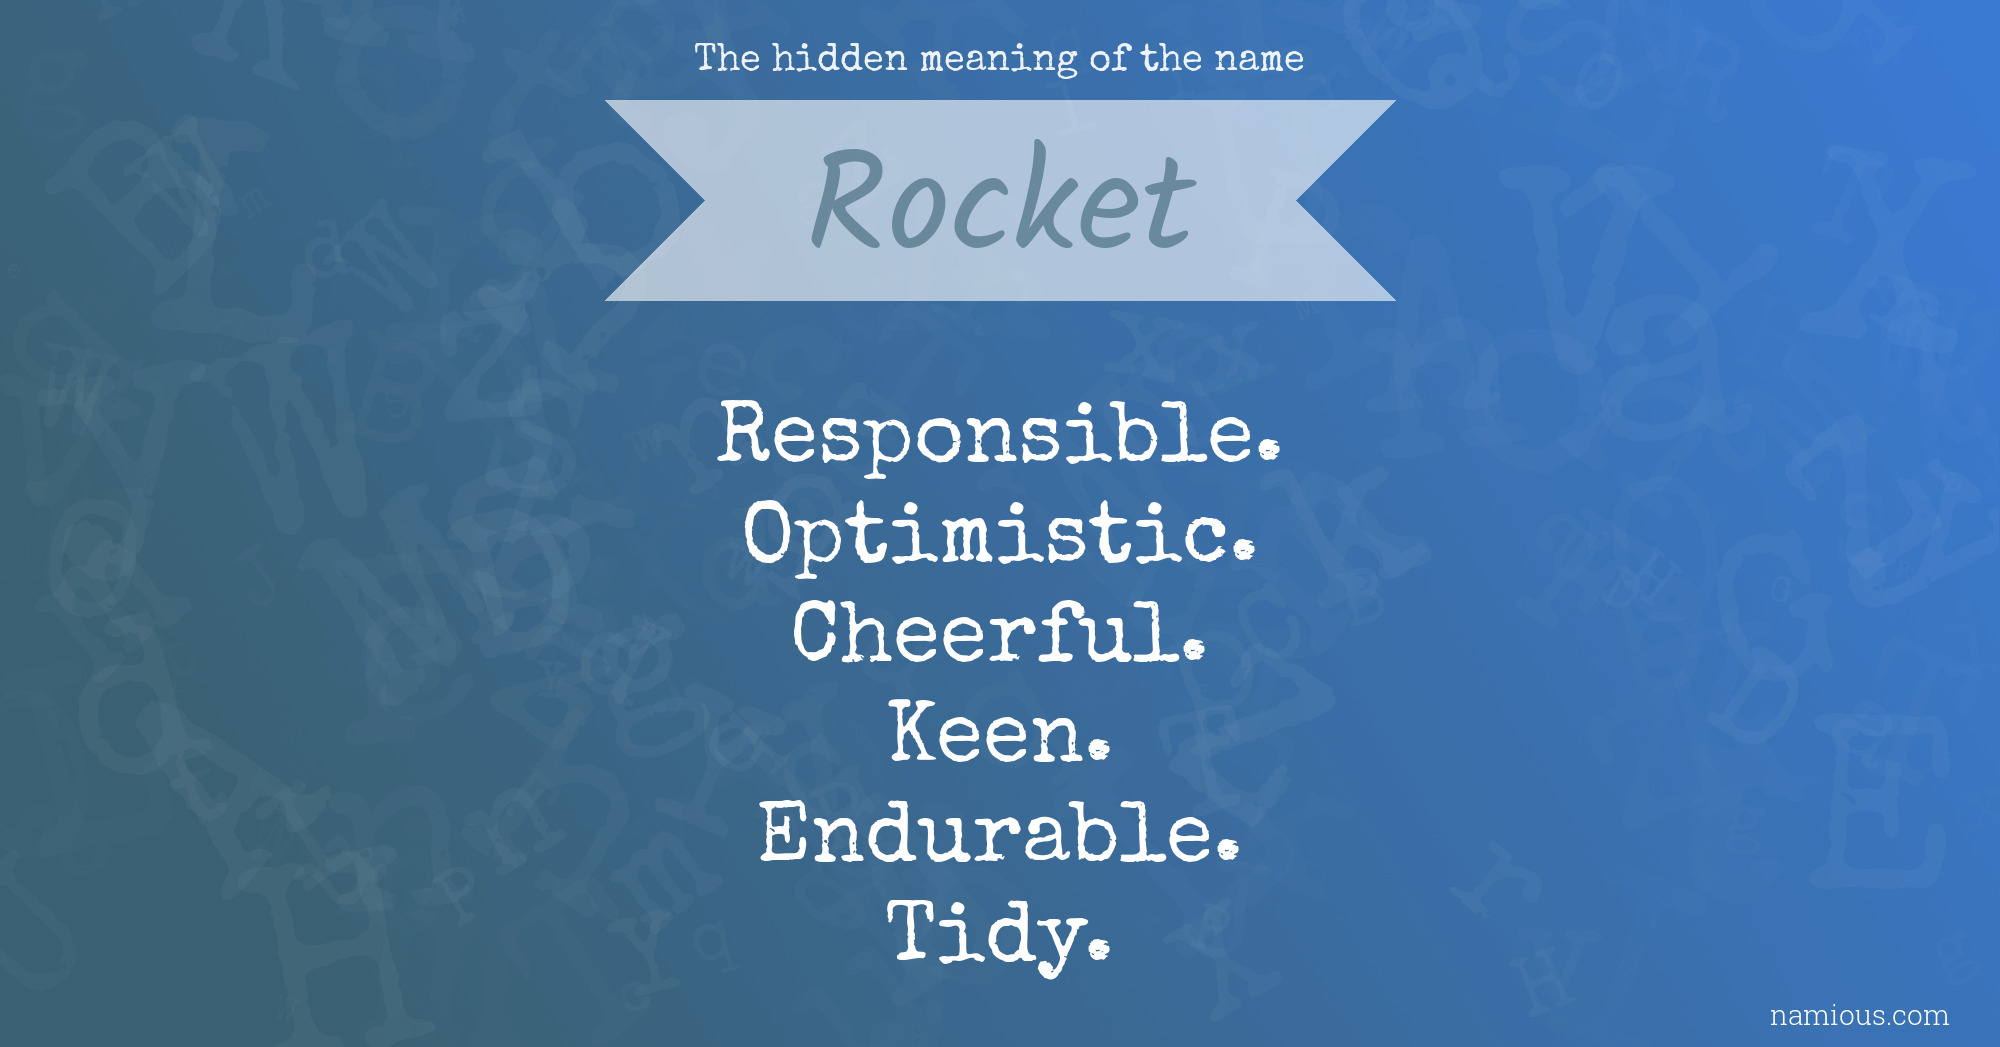 The hidden meaning of the name Rocket